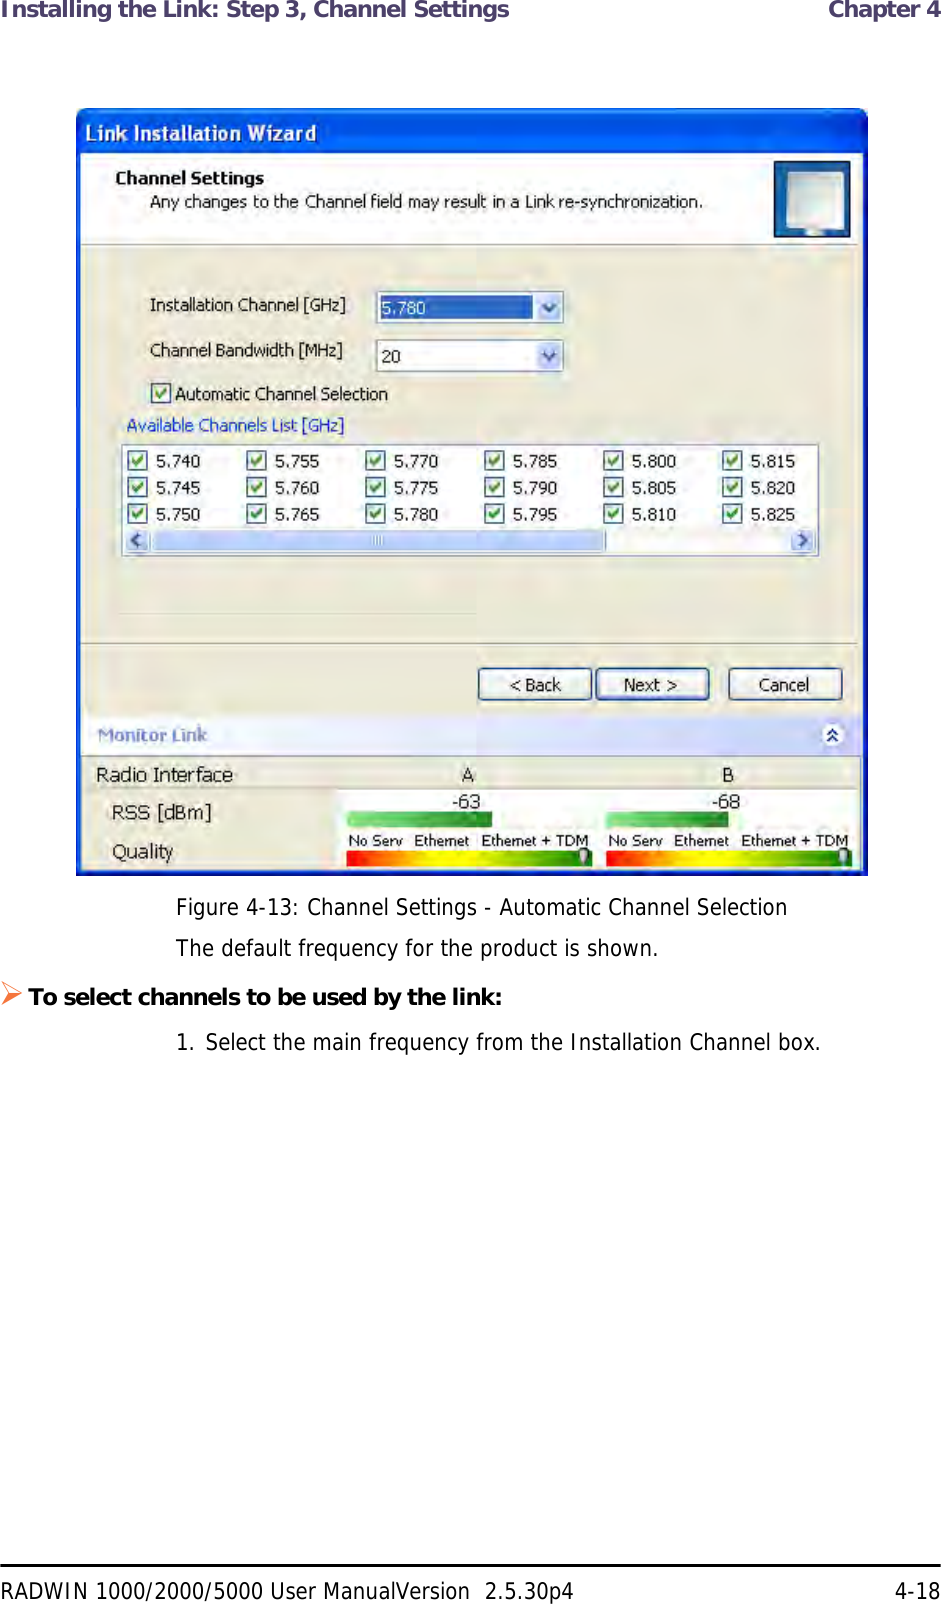 Installing the Link: Step 3, Channel Settings  Chapter 4RADWIN 1000/2000/5000 User ManualVersion  2.5.30p4 4-18Figure 4-13: Channel Settings - Automatic Channel SelectionThe default frequency for the product is shown.To select channels to be used by the link:1. Select the main frequency from the Installation Channel box.